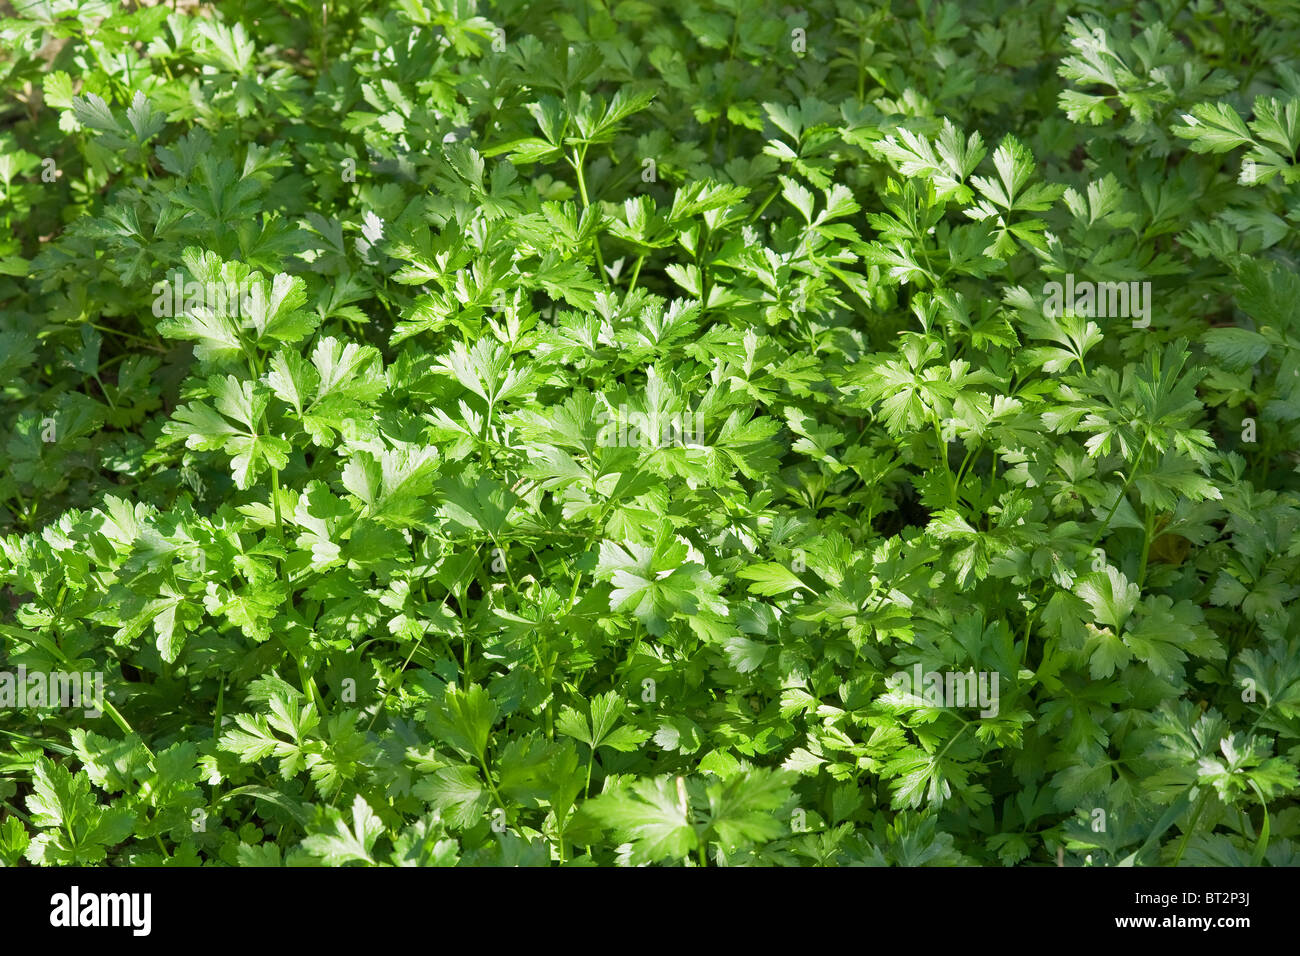 Closeup of fresh parsley in a biological crop Stock Photo